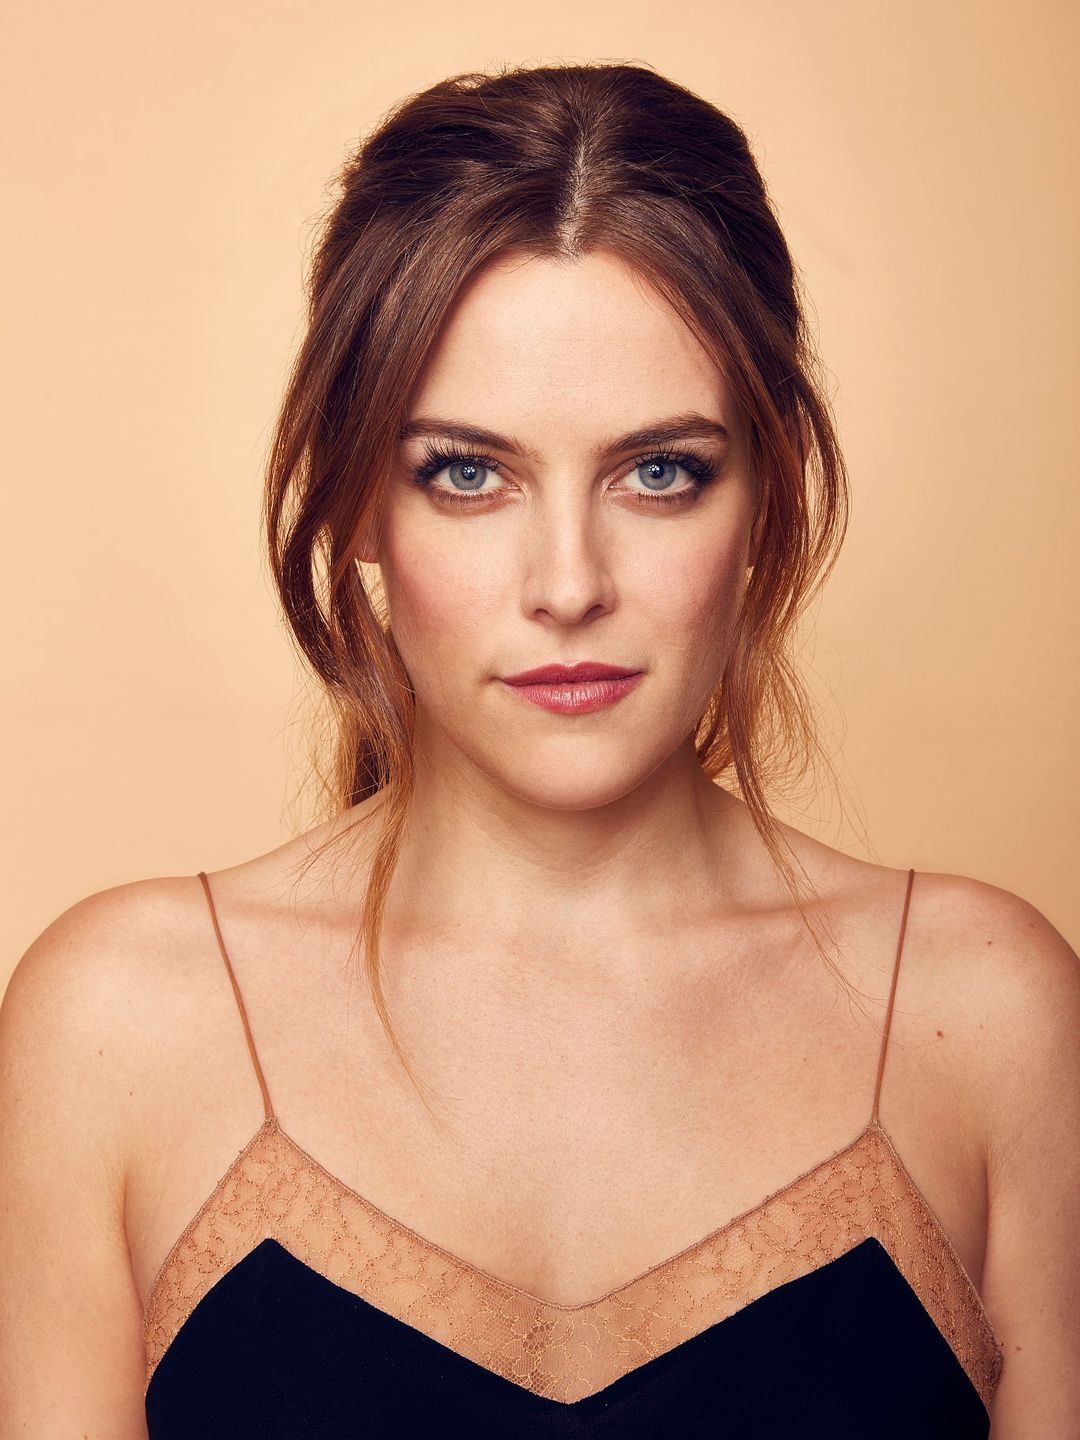 Riley Keough who is her father